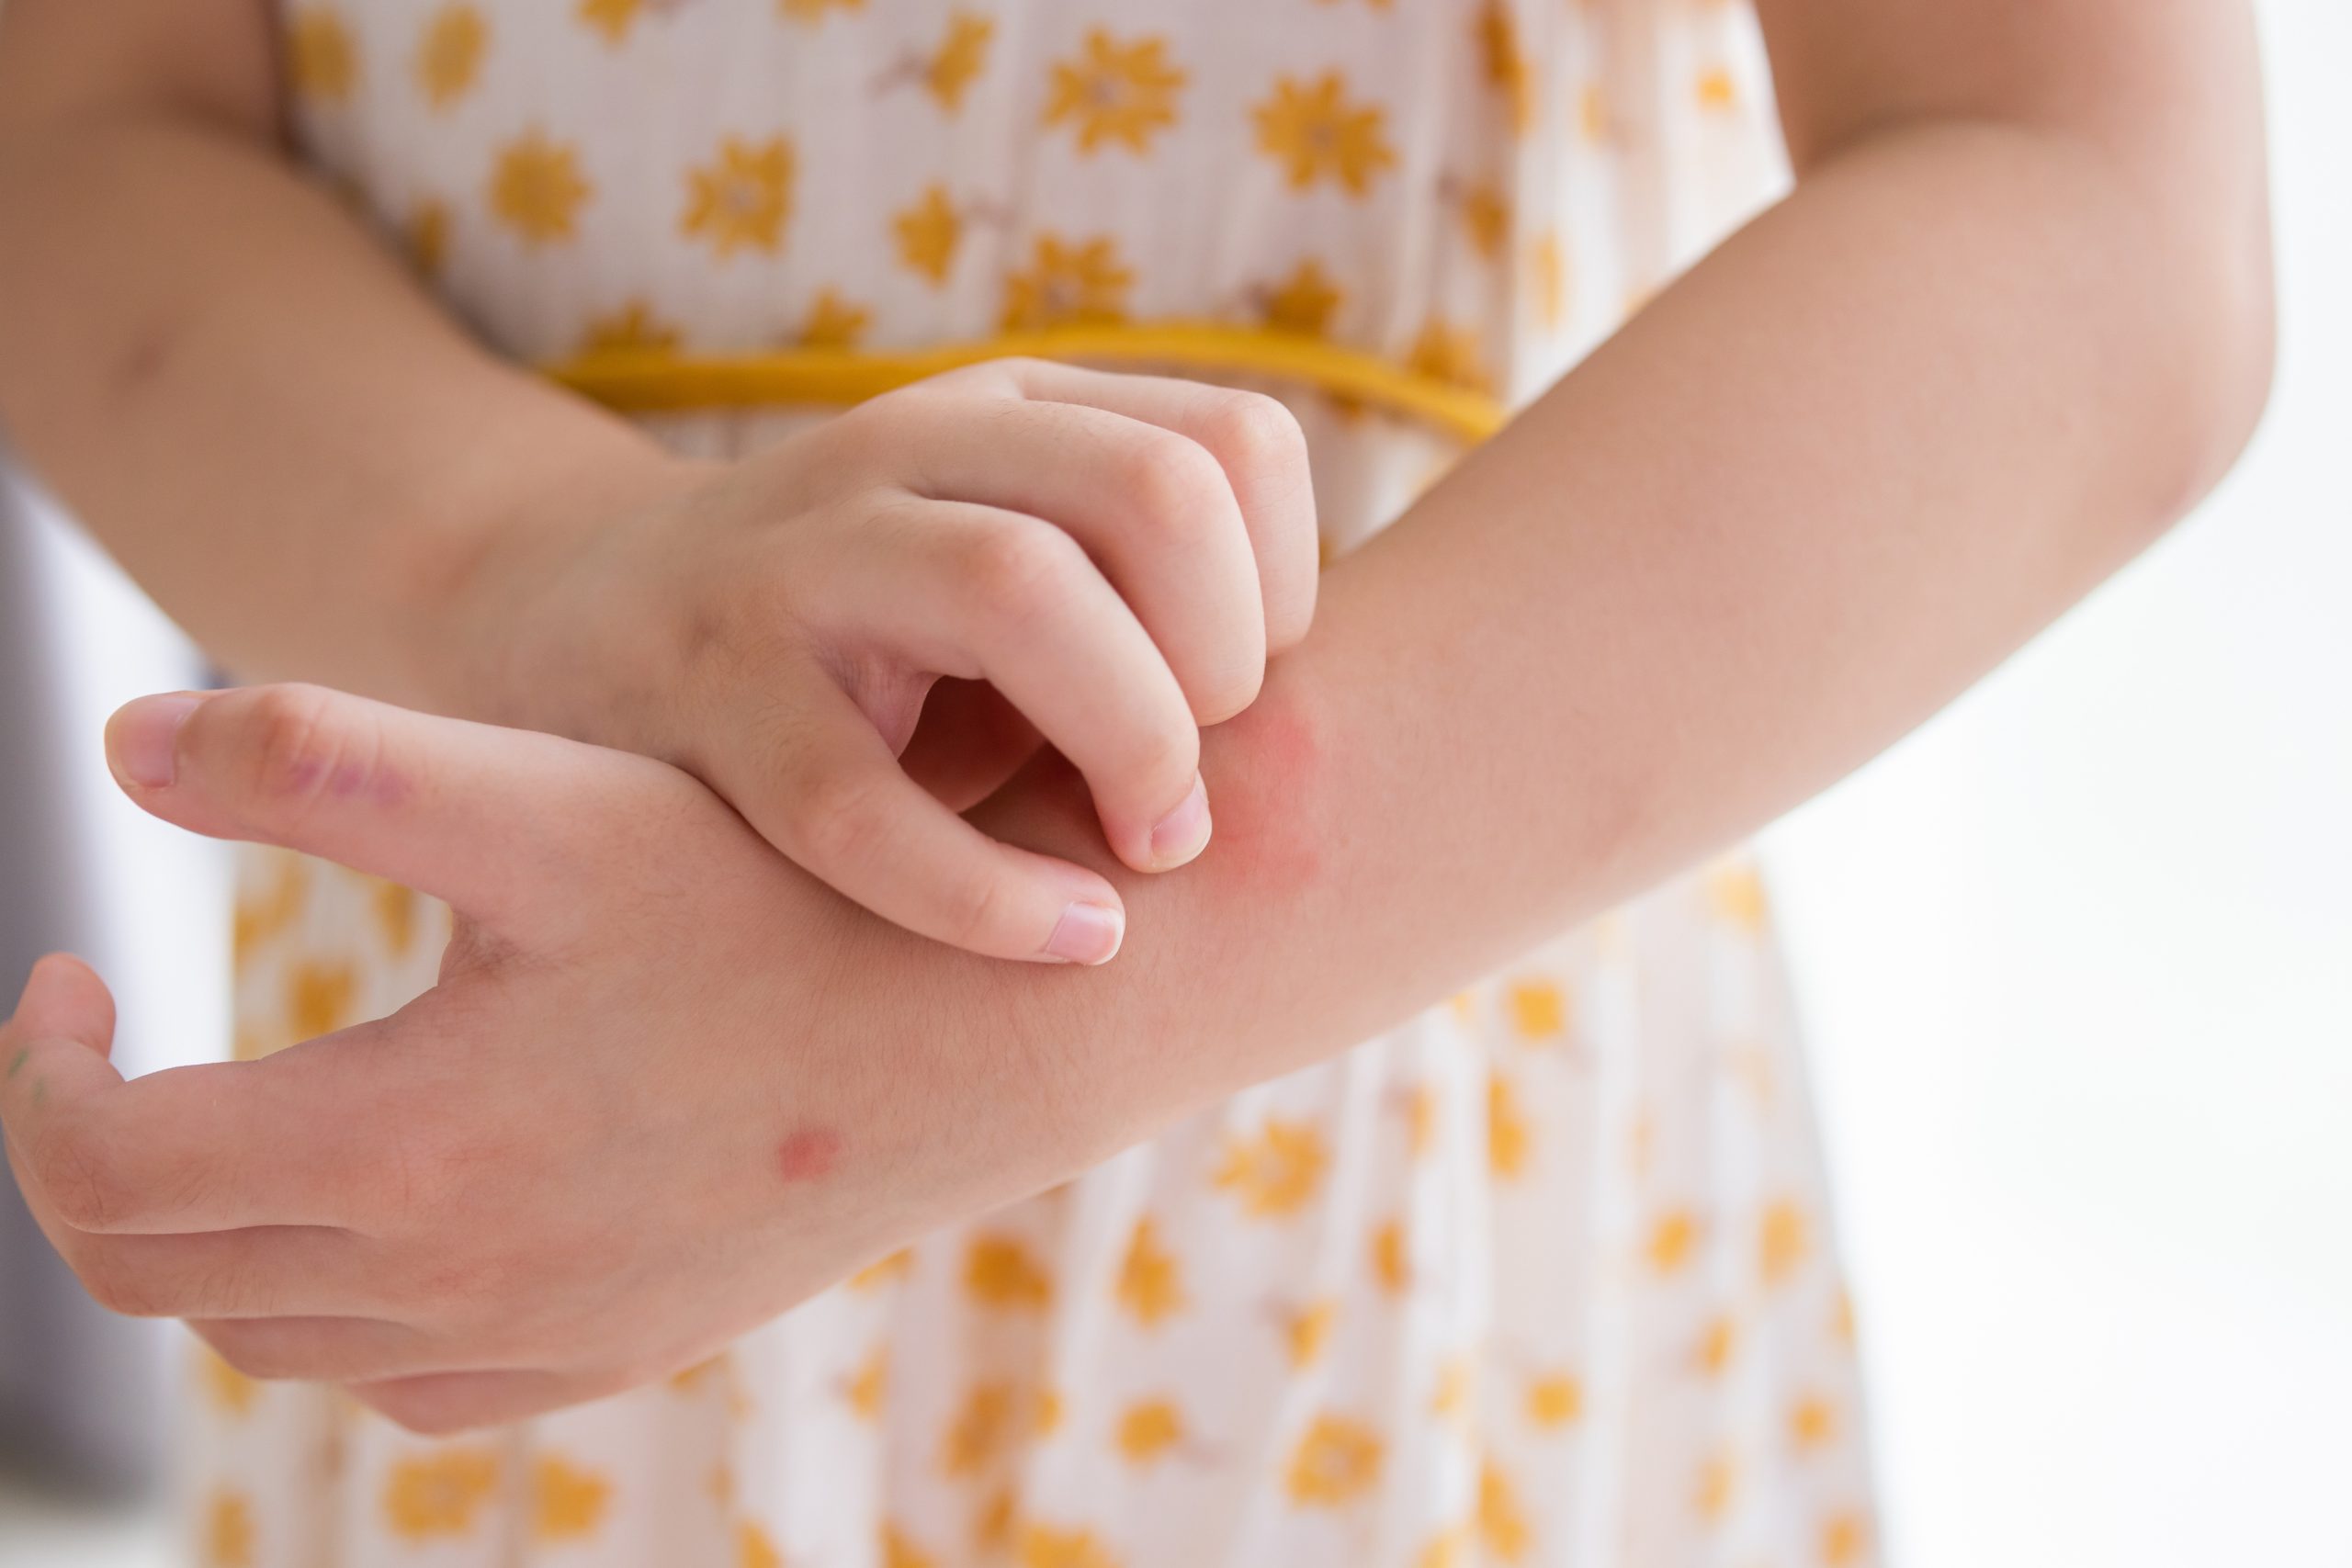 Itchy or painful rashes can be very worrying! Learn when to treat rashes at home and these 5 signs it’s time to visit a dermatologist for rash relief.